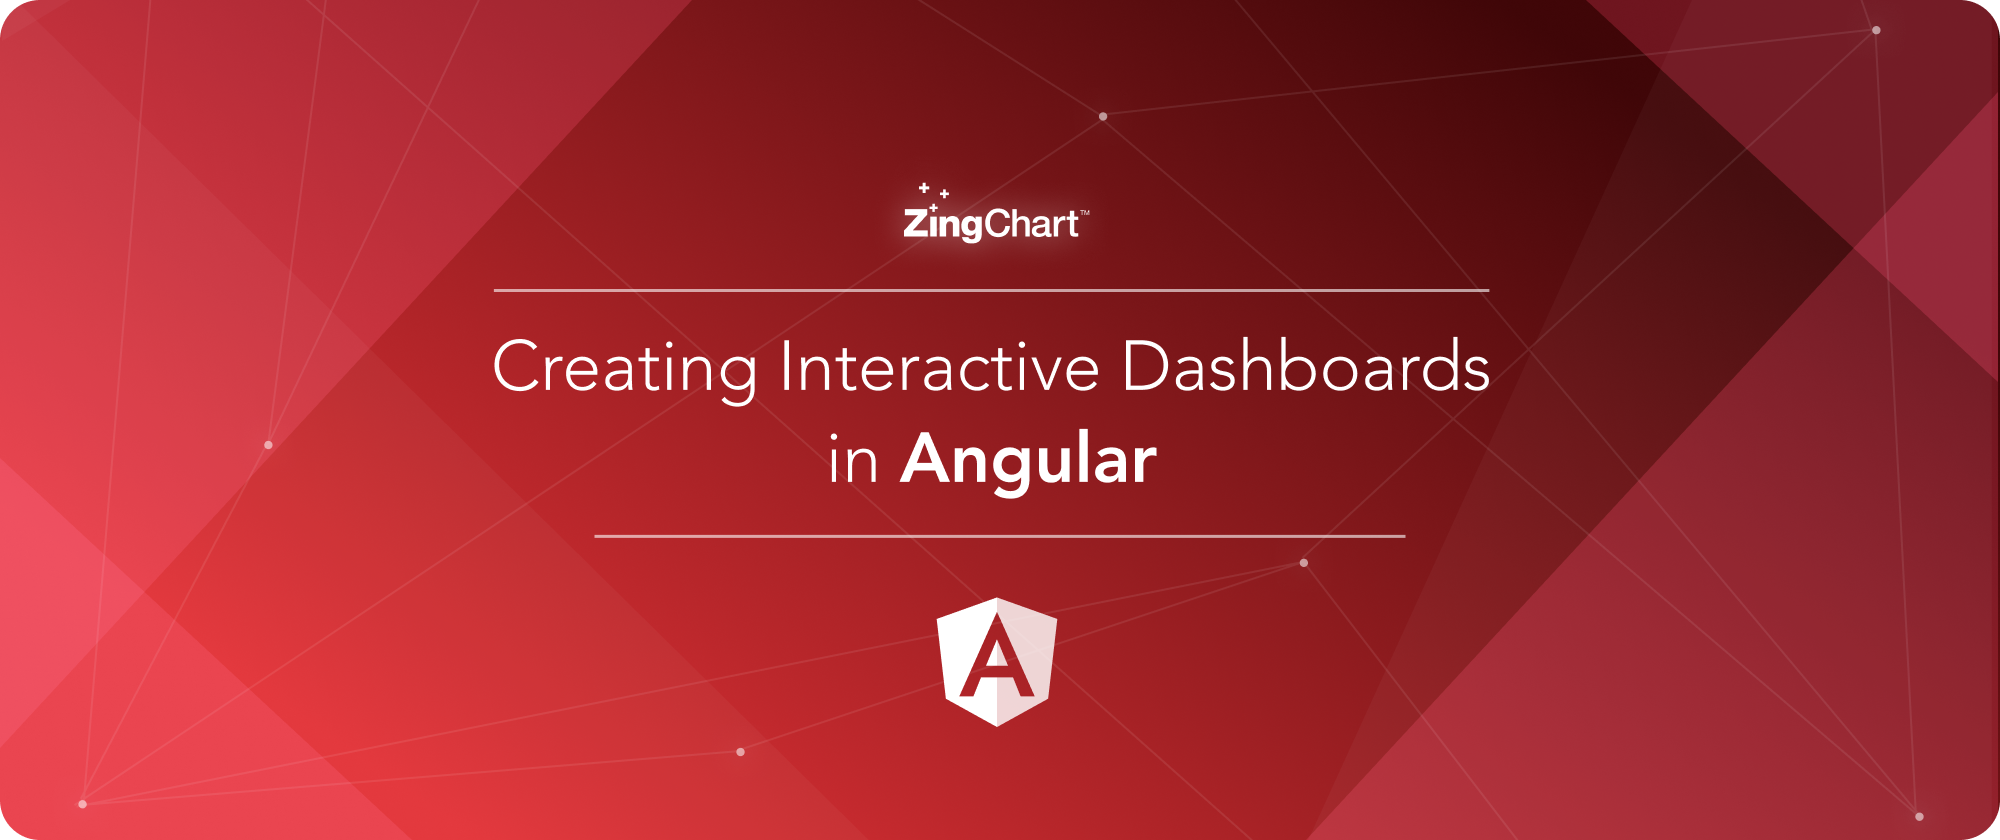 Cover image for 'Integrating ZingChart and Vue' blog series